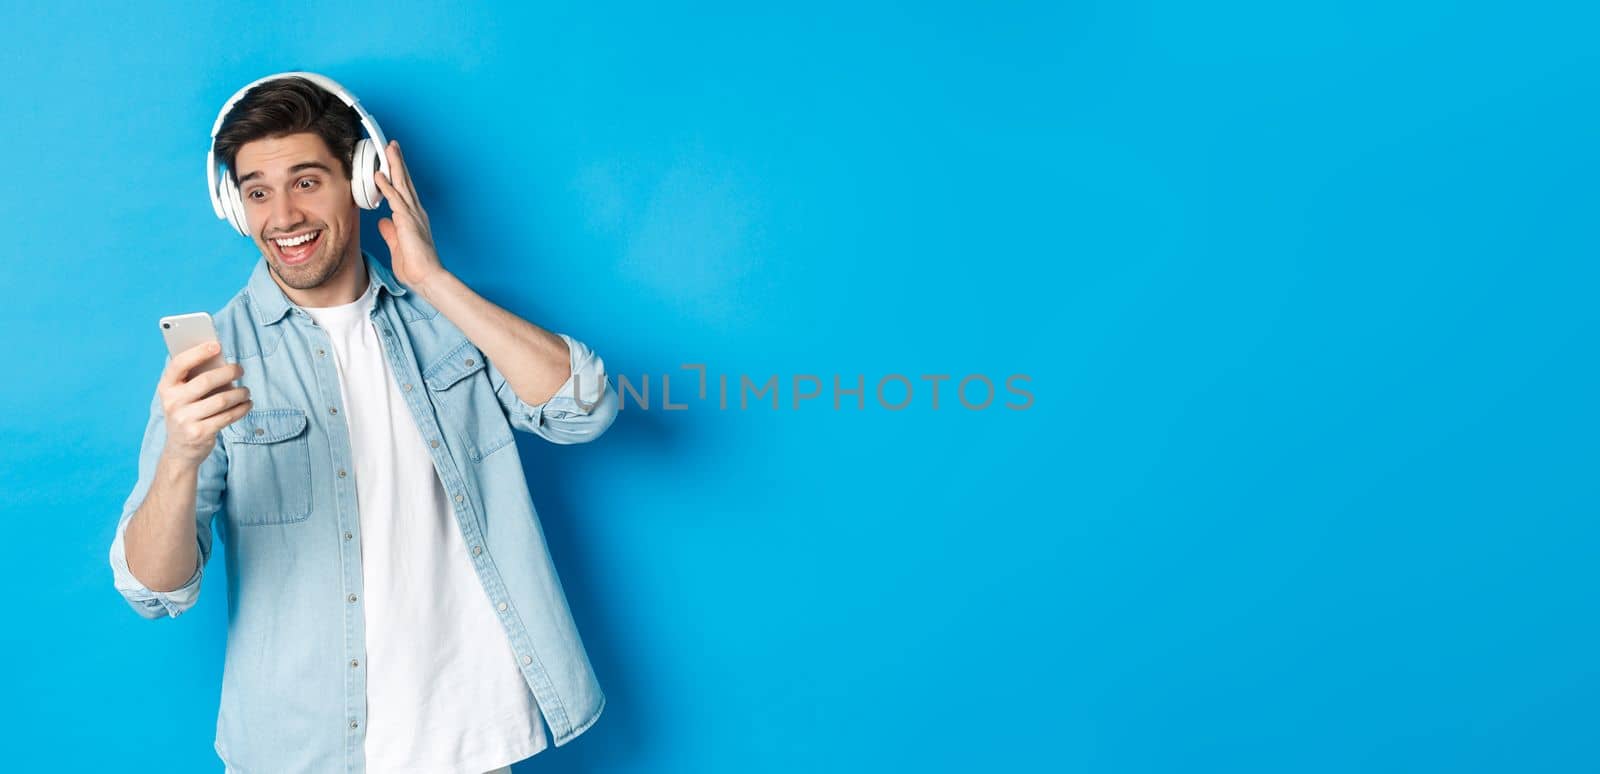 Happy man listening to music in headphones and reading message on smartphone, smiling excited, standing against blue background.